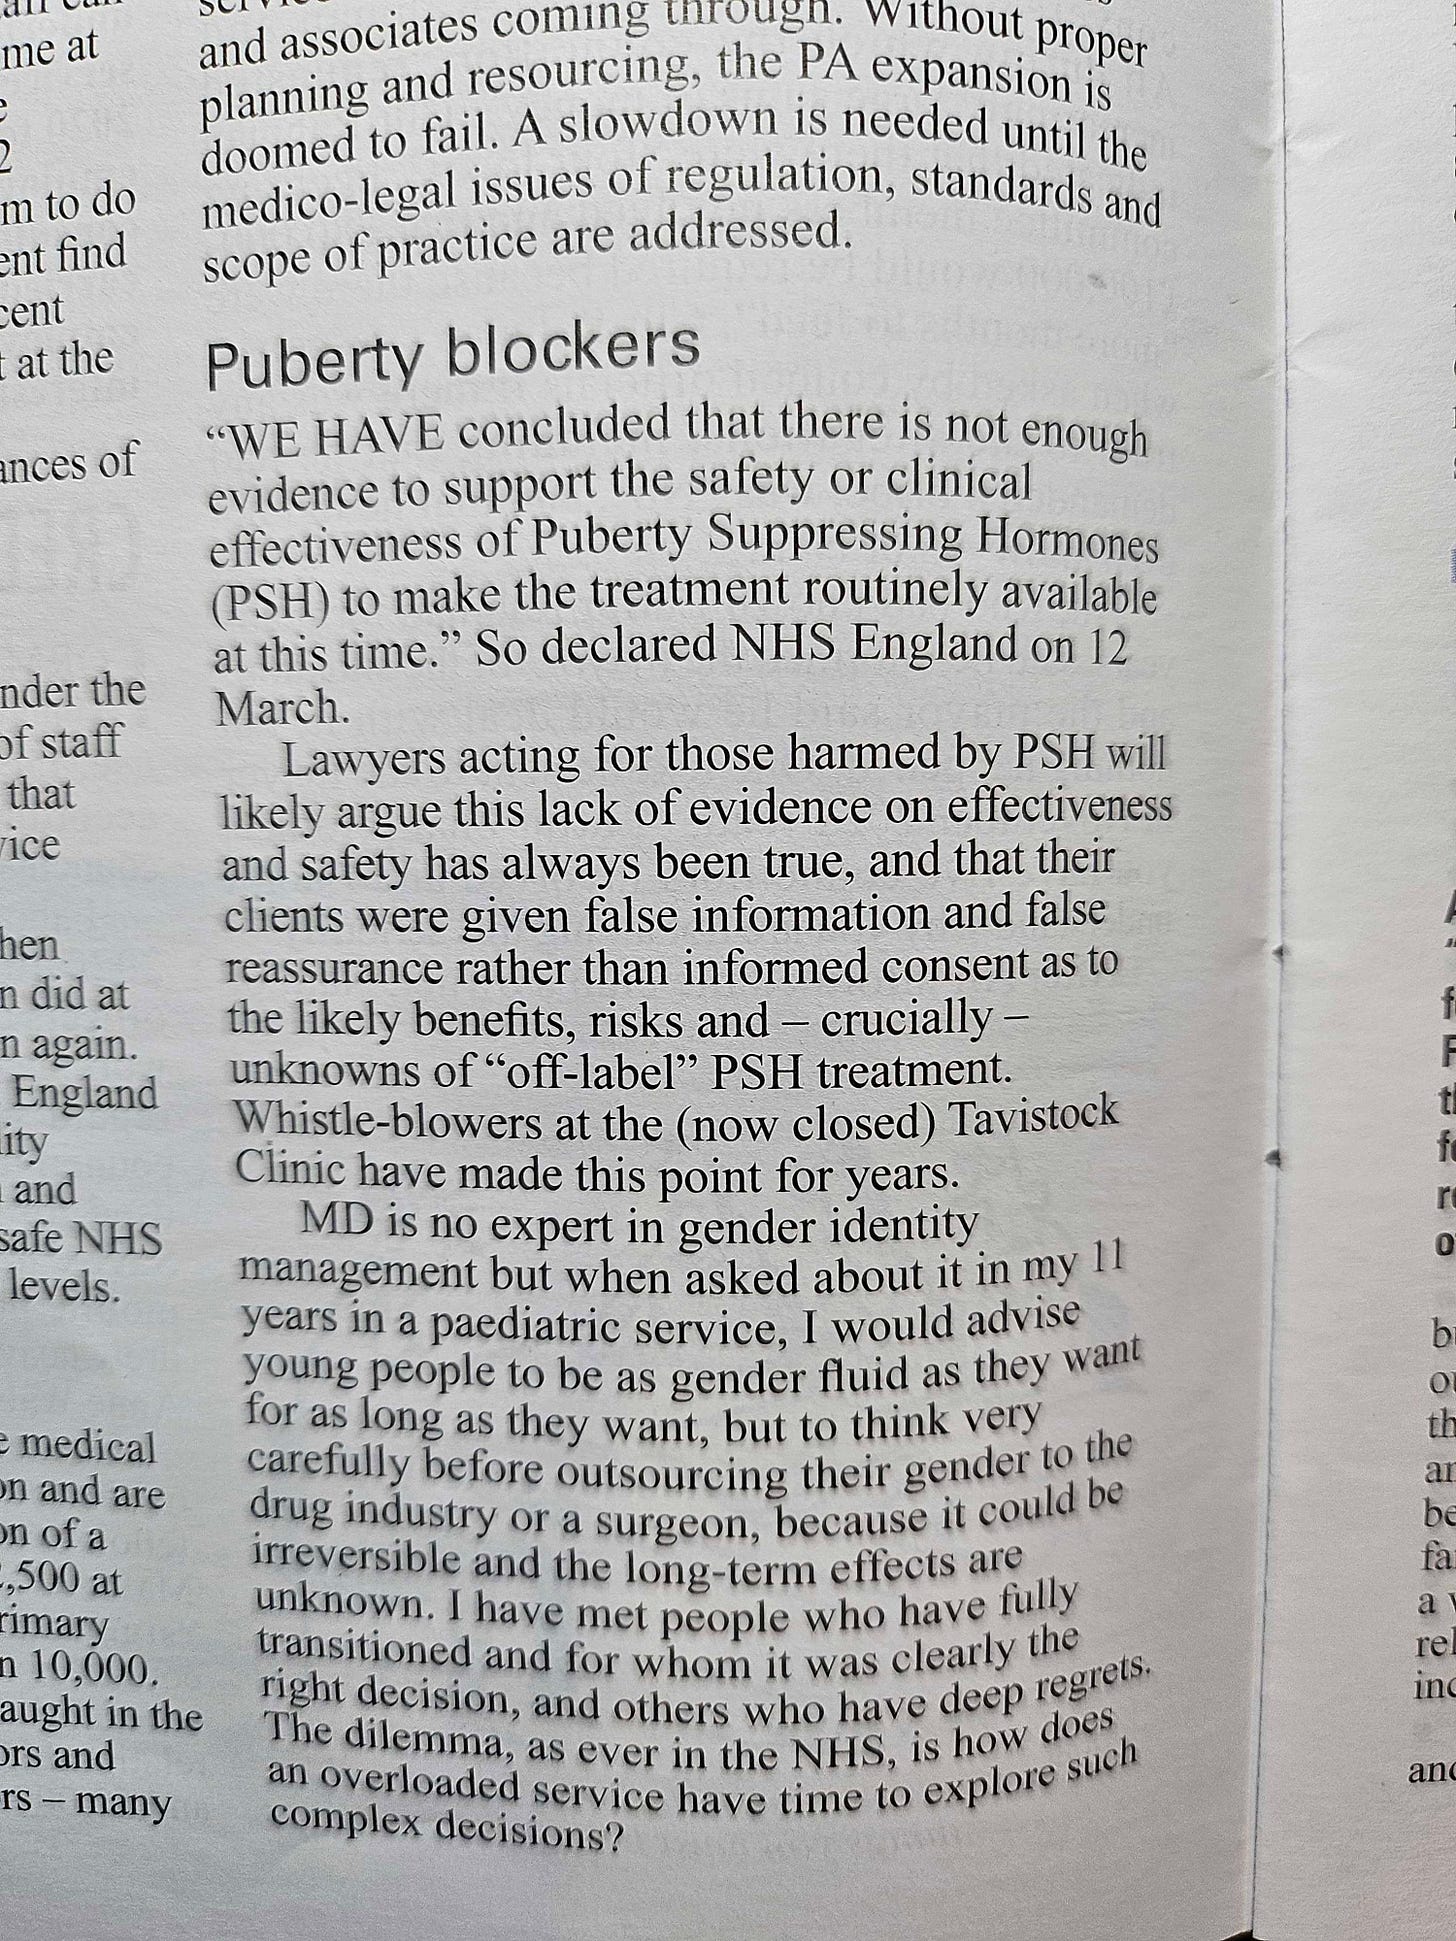 Piece on puberty blockers in Private EYe my MD that shows a deep lack of knowledge and understanding on the issue as well as numerous assumptions without evidence and anecdotal evidence offered up as proof